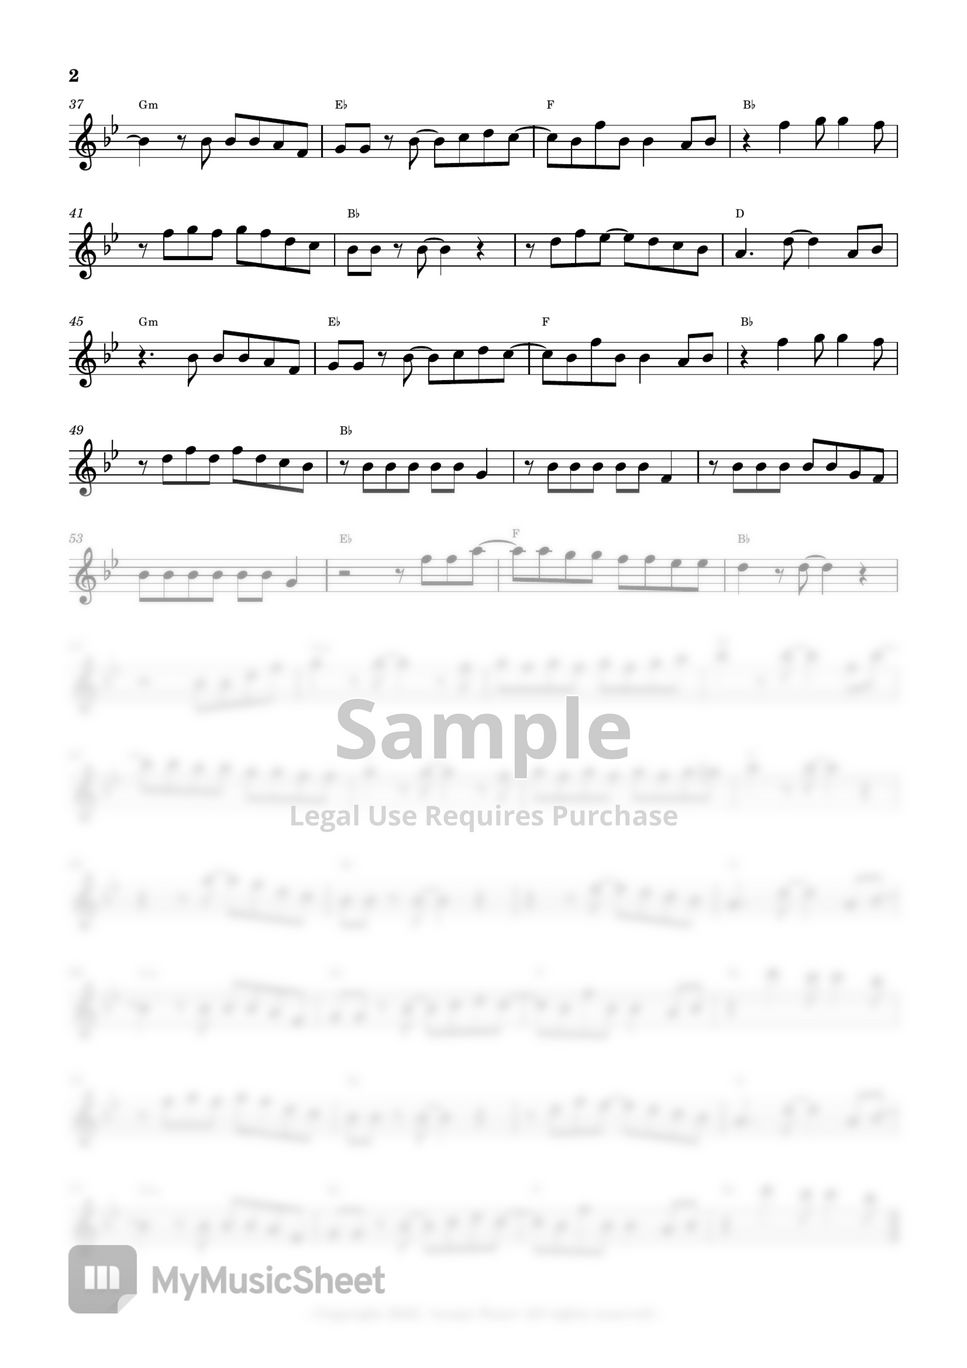 Meghan Trainor - Made You Look (Flute Sheet Music Easy) by sonye flute